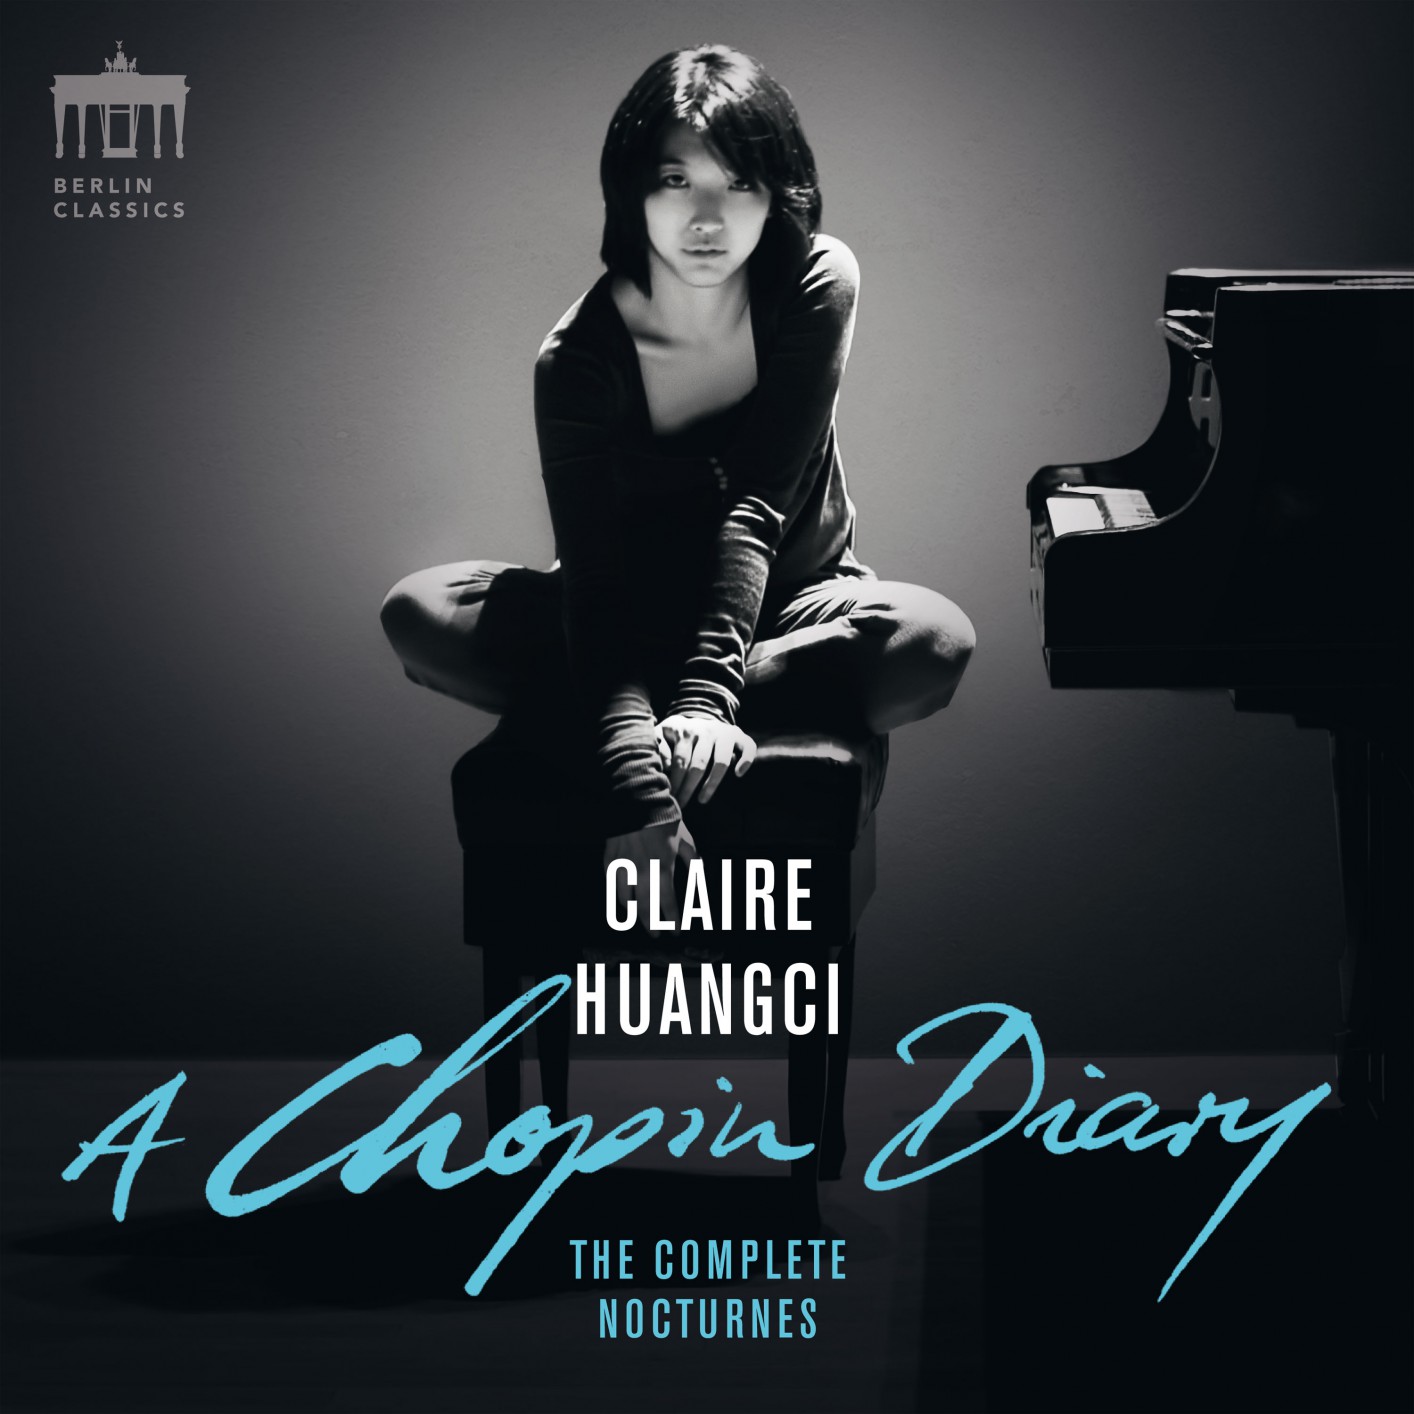 Claire Huangci - A Chopin Diary (Complete Nocturnes) (2017) [FLAC 24bit/96kHz]